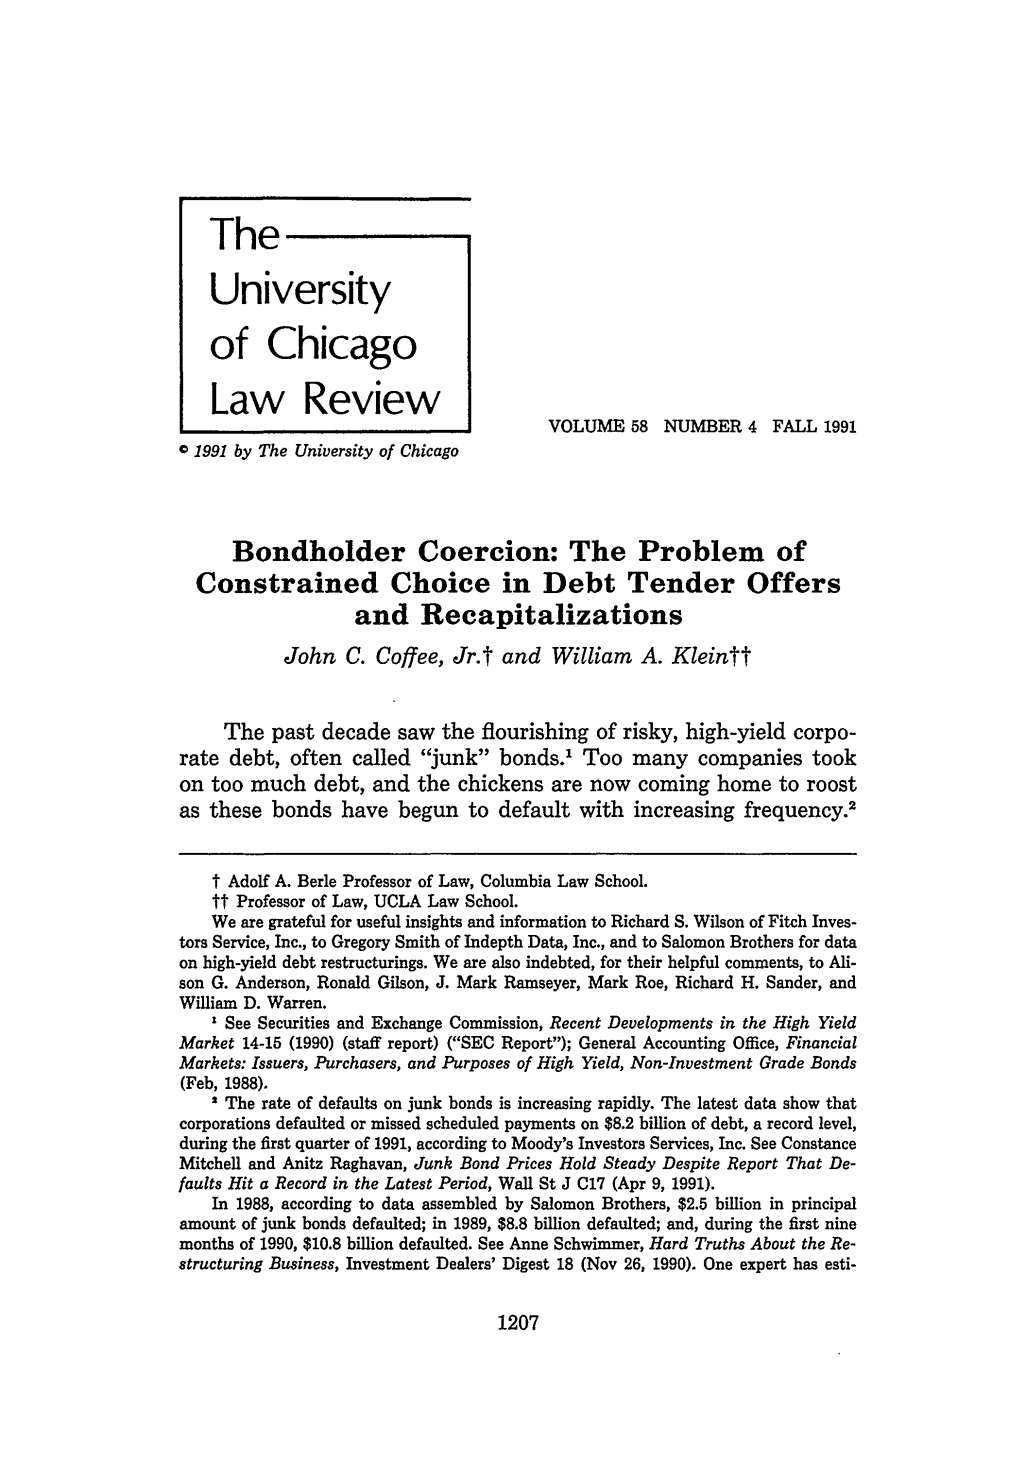 Bondholder Coercion: the Problem of Constrained Choice in Debt Tender Offers and Recapitalizations John C